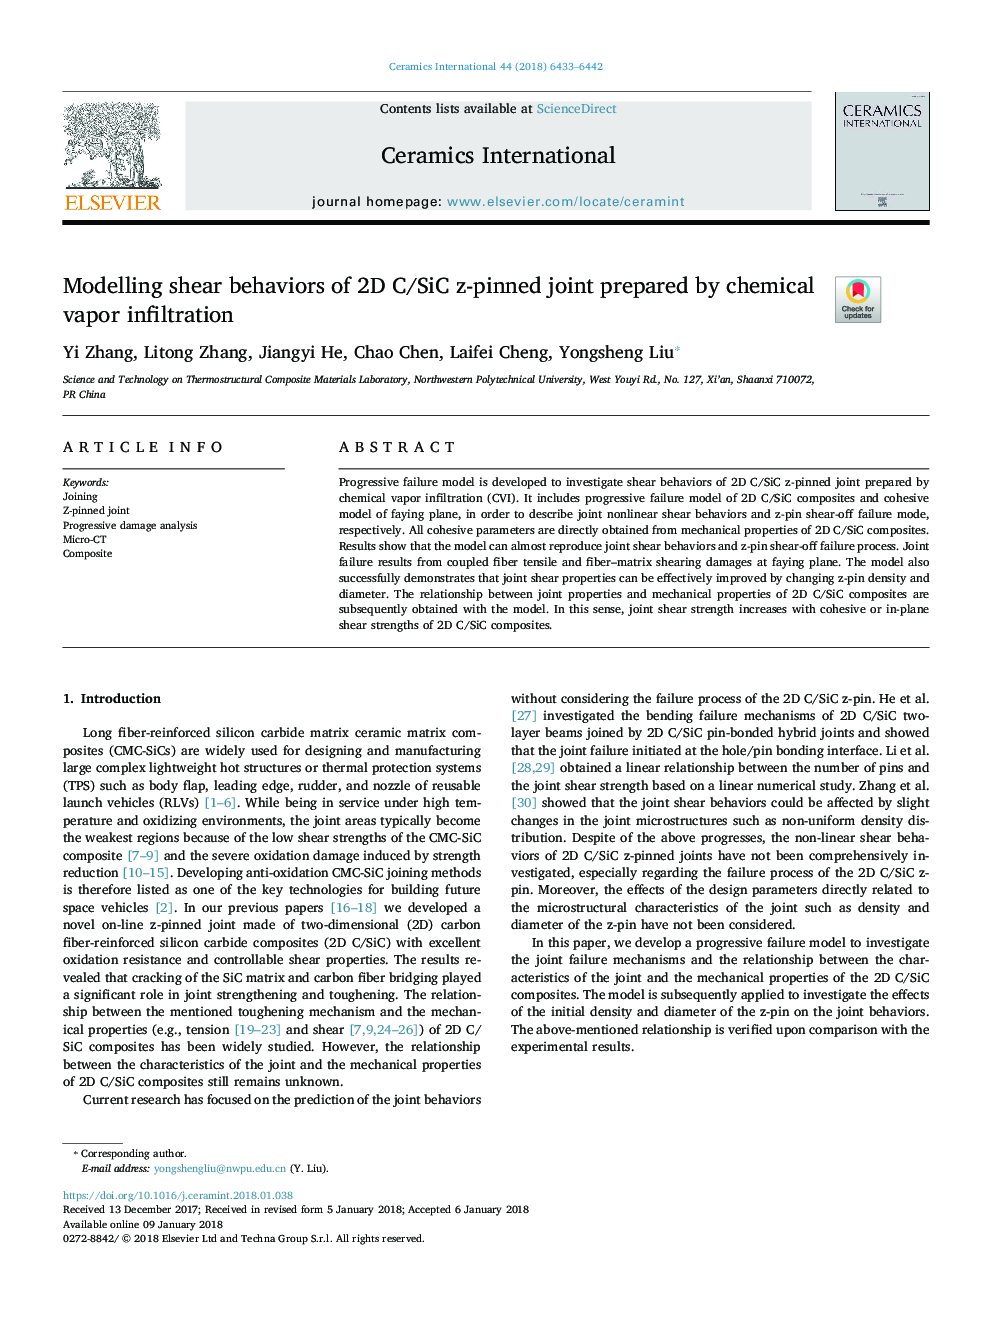 Modelling shear behaviors of 2D C/SiC z-pinned joint prepared by chemical vapor infiltration